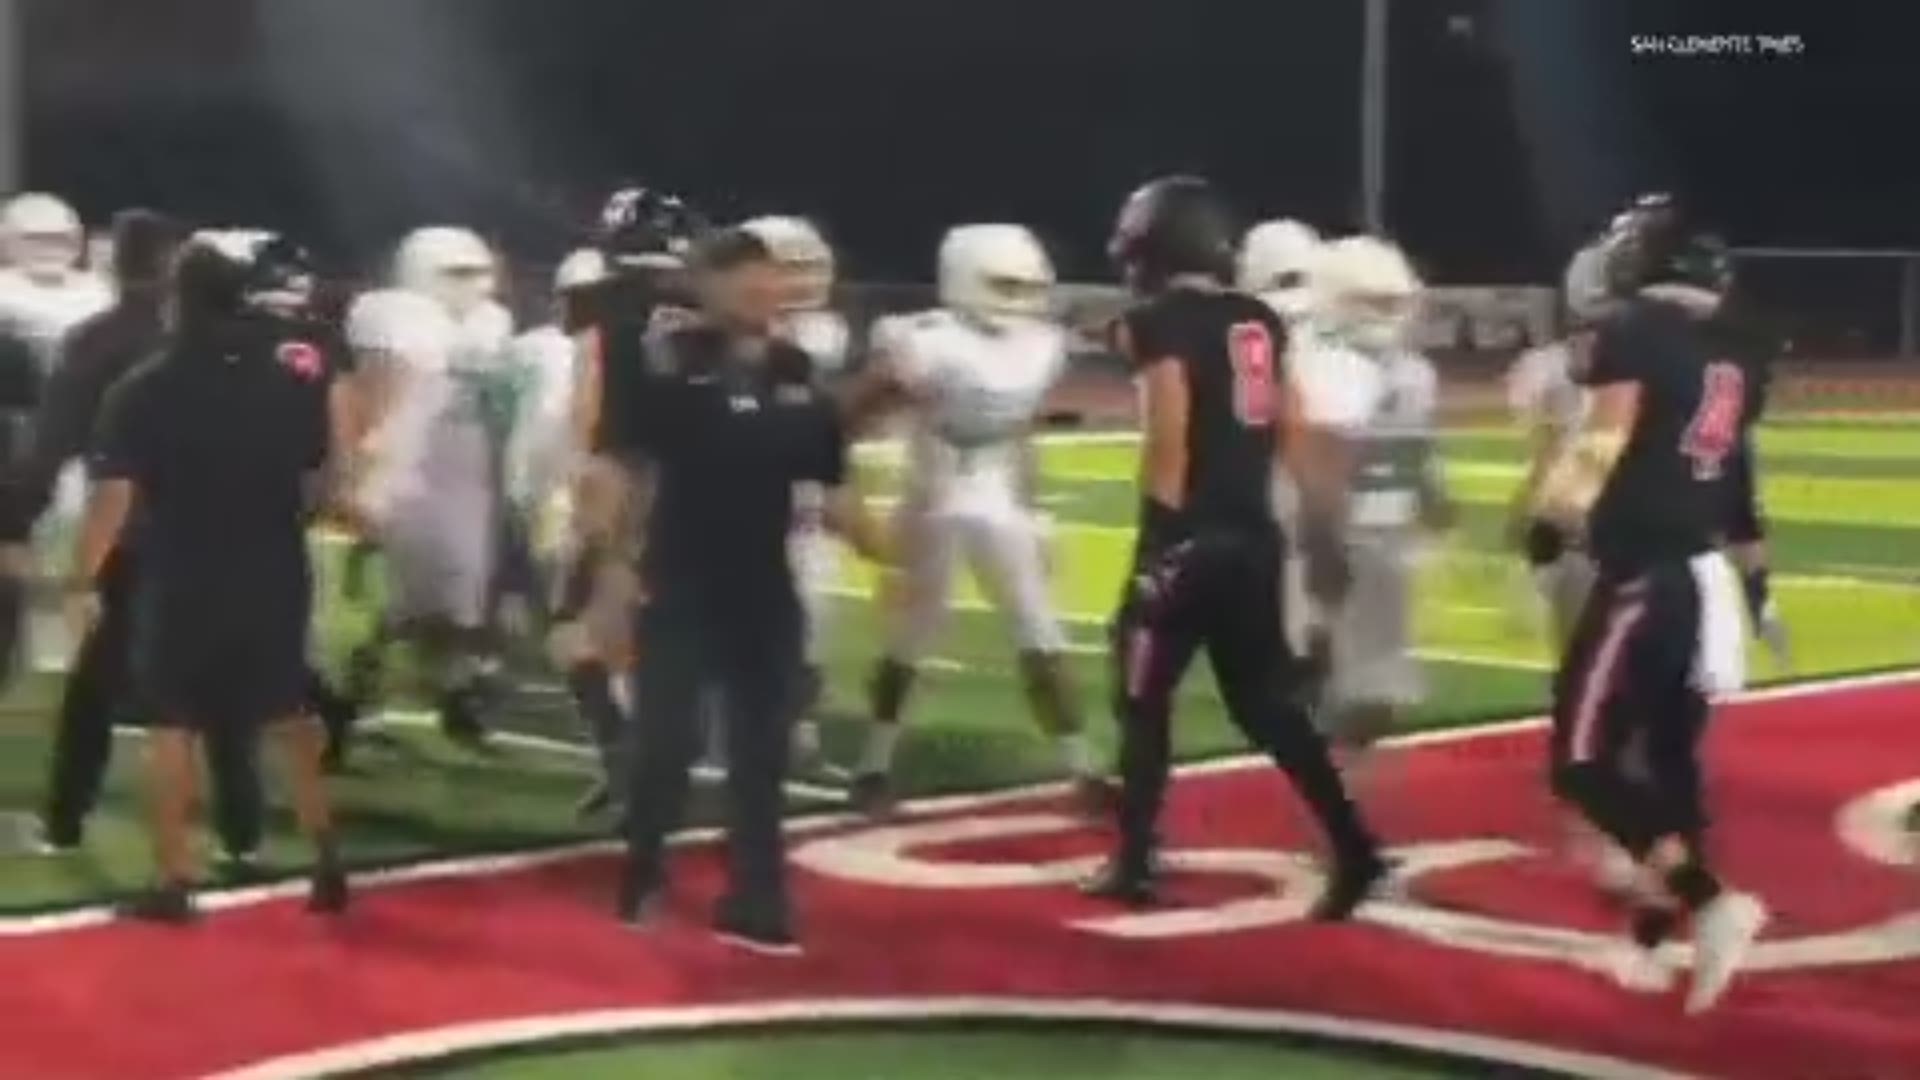 Multiple parents and students from Lincoln High School say they were targeted with numerous racial slurs during Friday night's away football game at San Clemente.